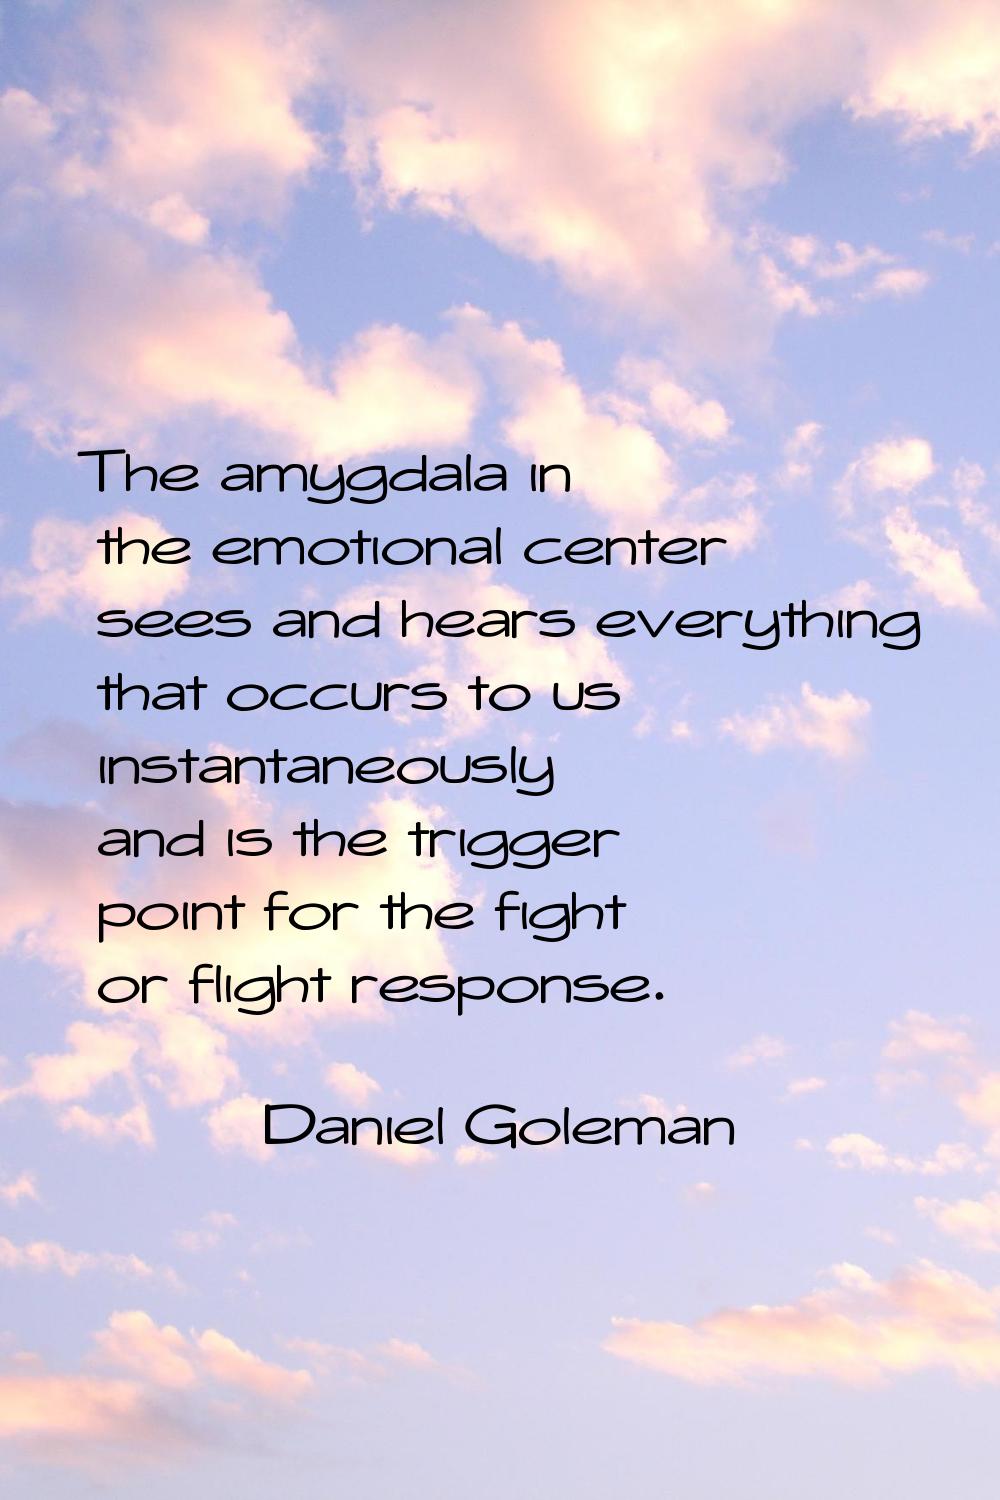 The amygdala in the emotional center sees and hears everything that occurs to us instantaneously an